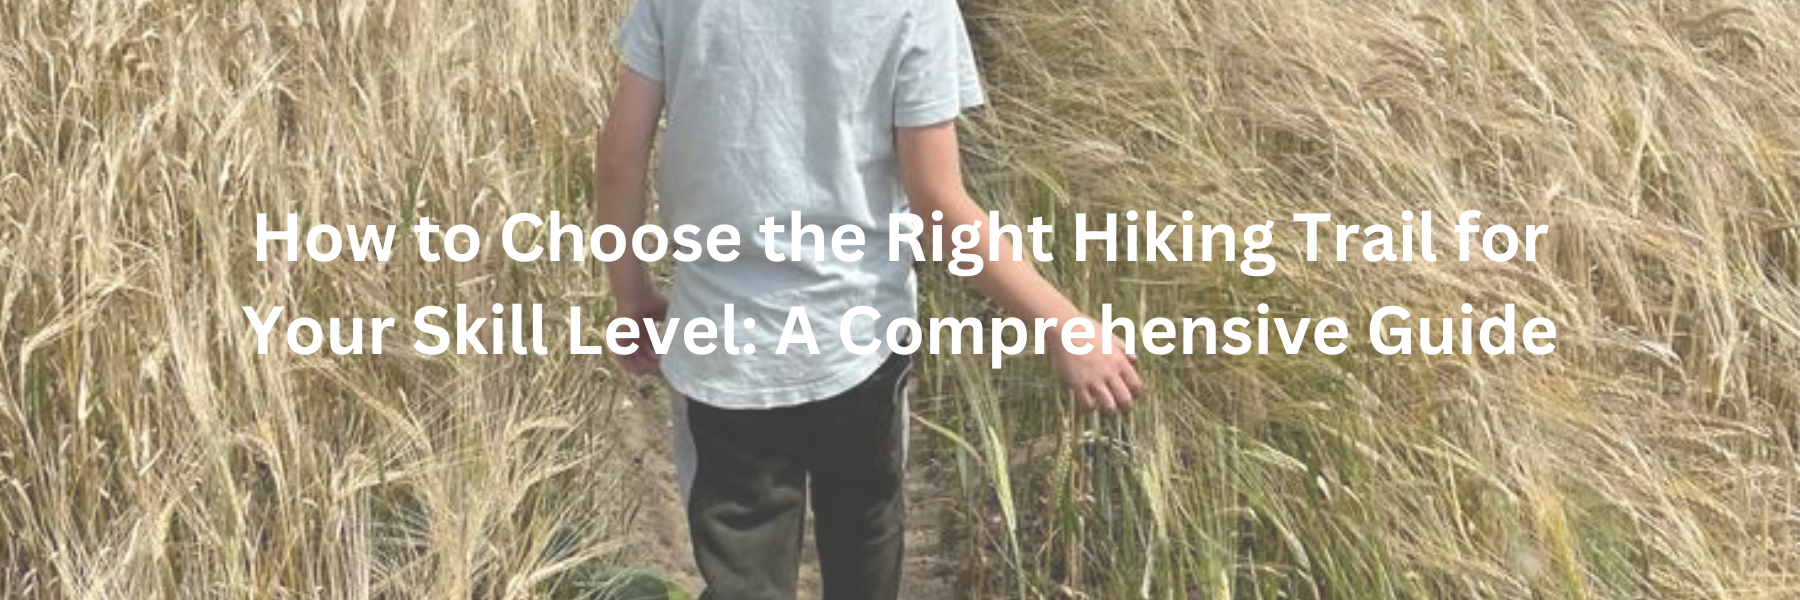 How to Choose the Right Hiking Trail for Your Skill Level A Comprehensive Guide